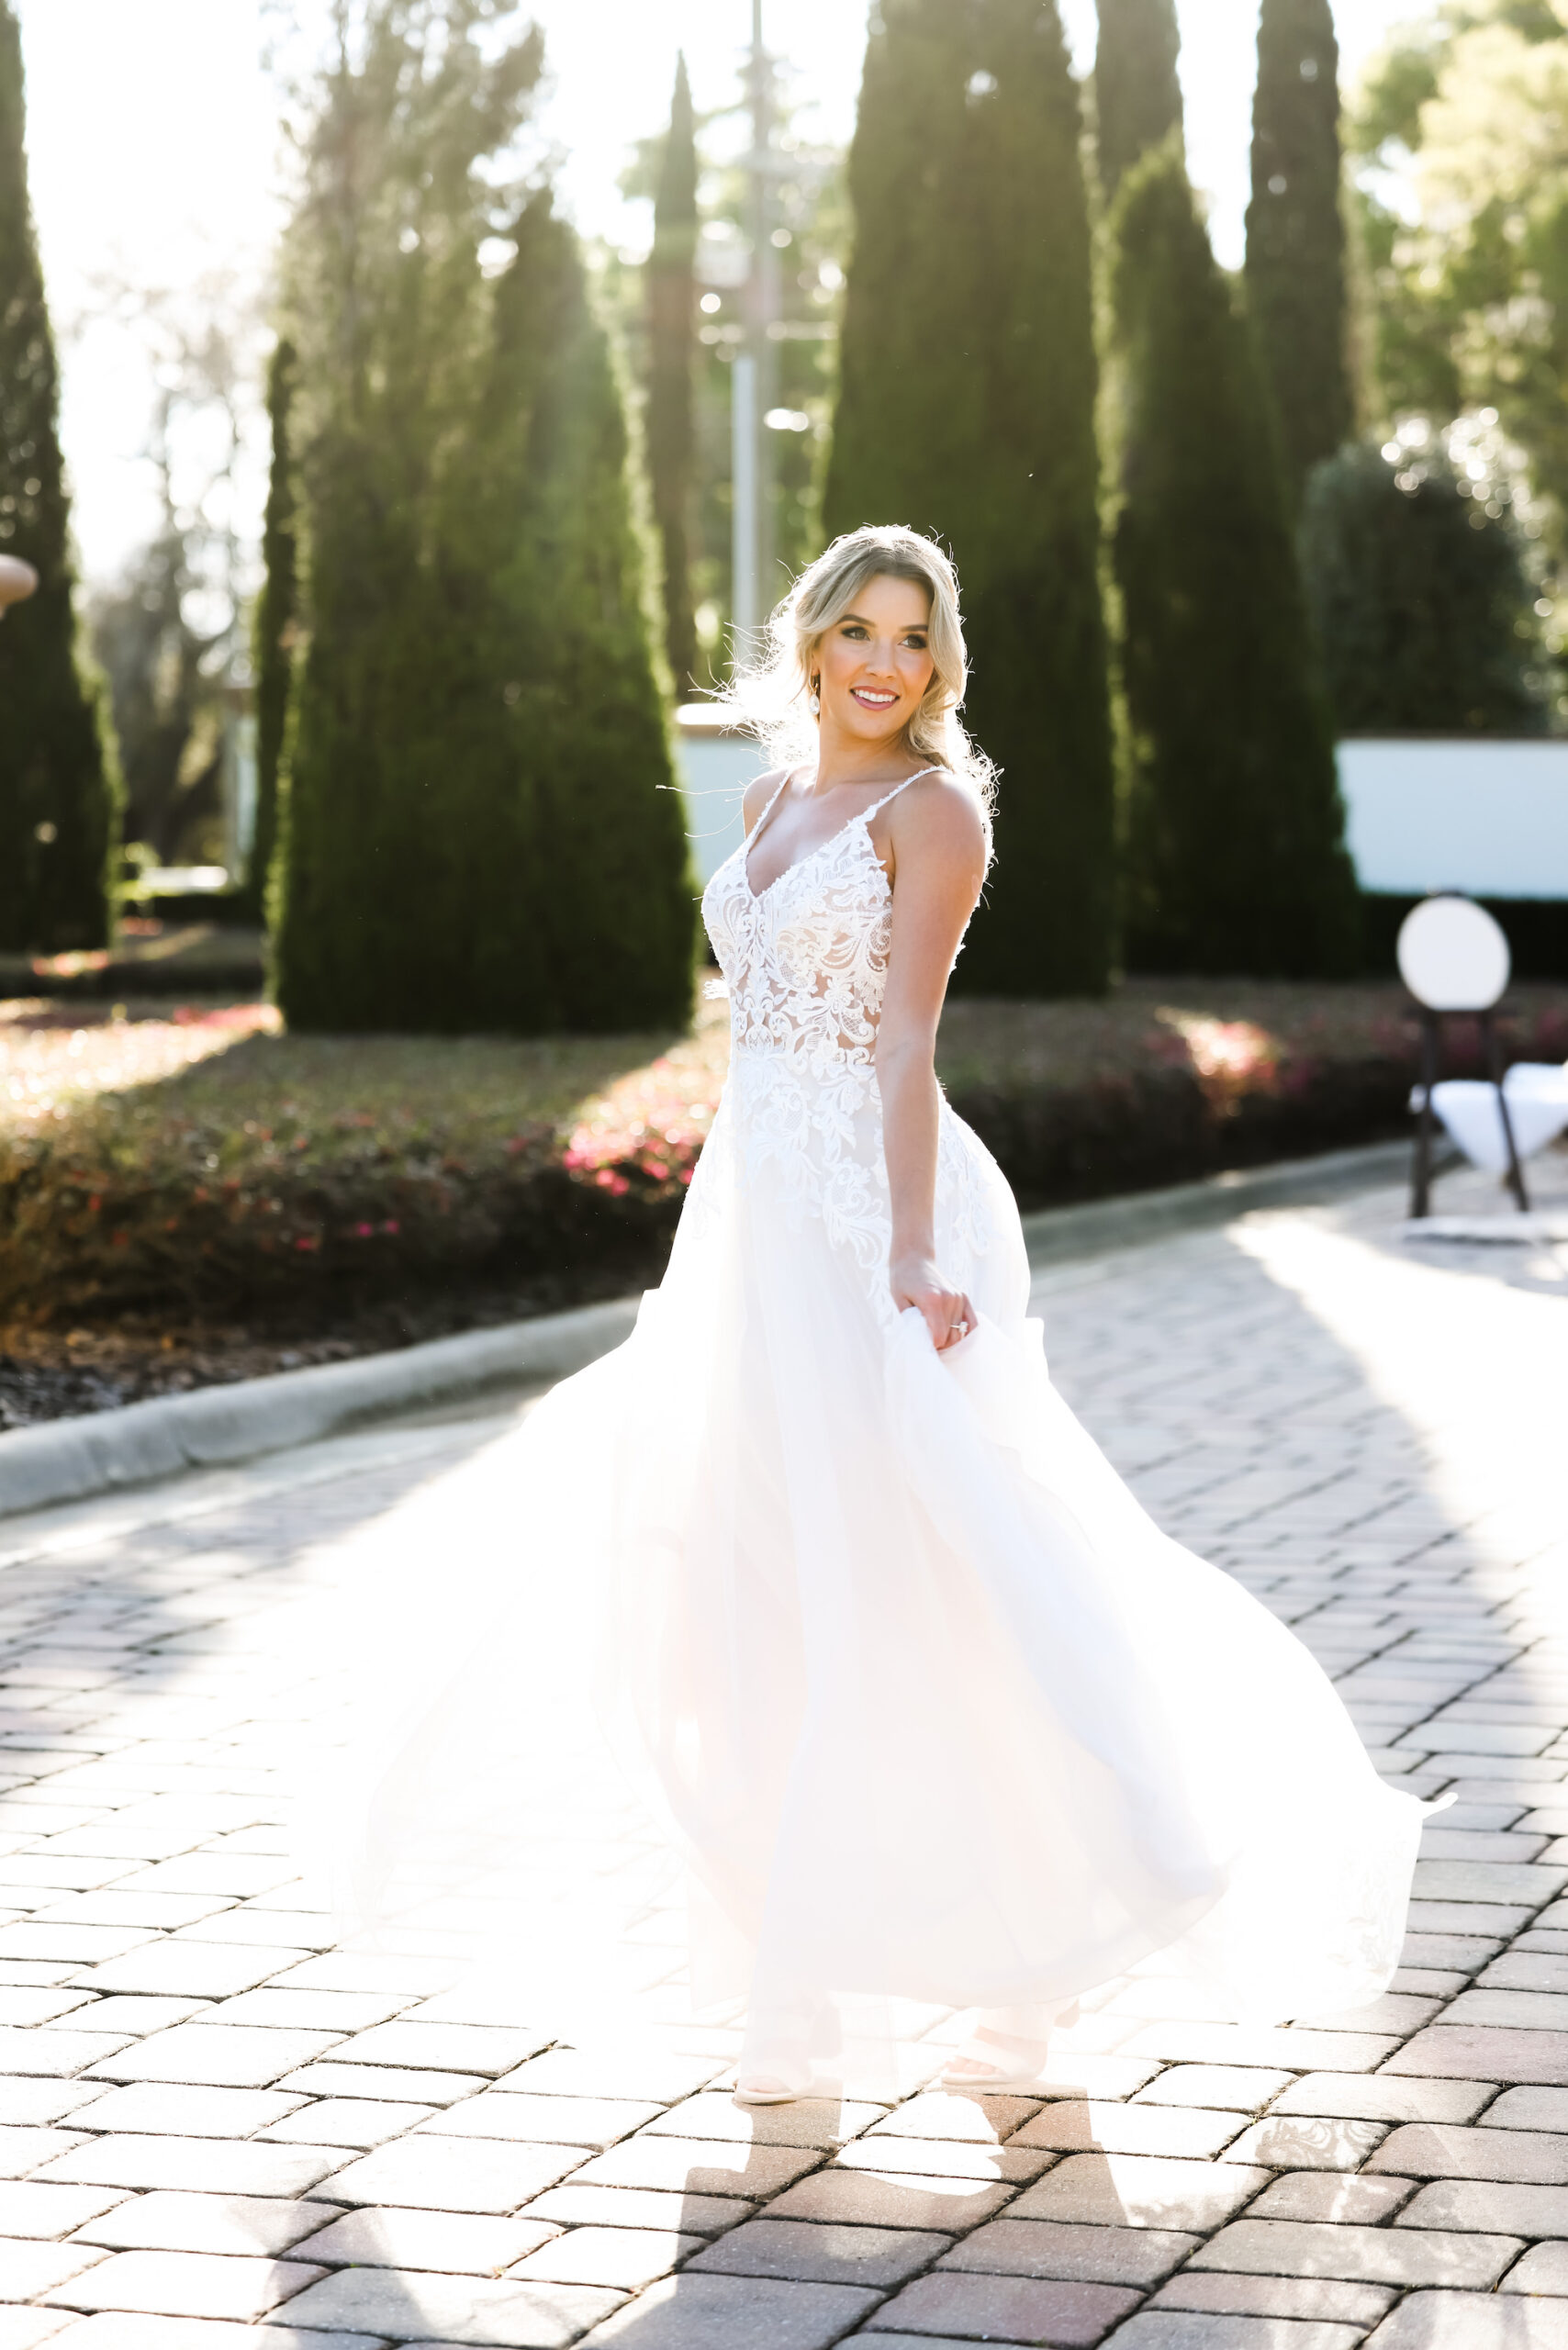 Bride with Half Up Half Down Hair and Open Back Spaghetti Strap Wedding Dress | Tampa Boutique Truly Forever Bridal | Hair and Makeup Artists Adore Bridal | Lifelong Photography Studio